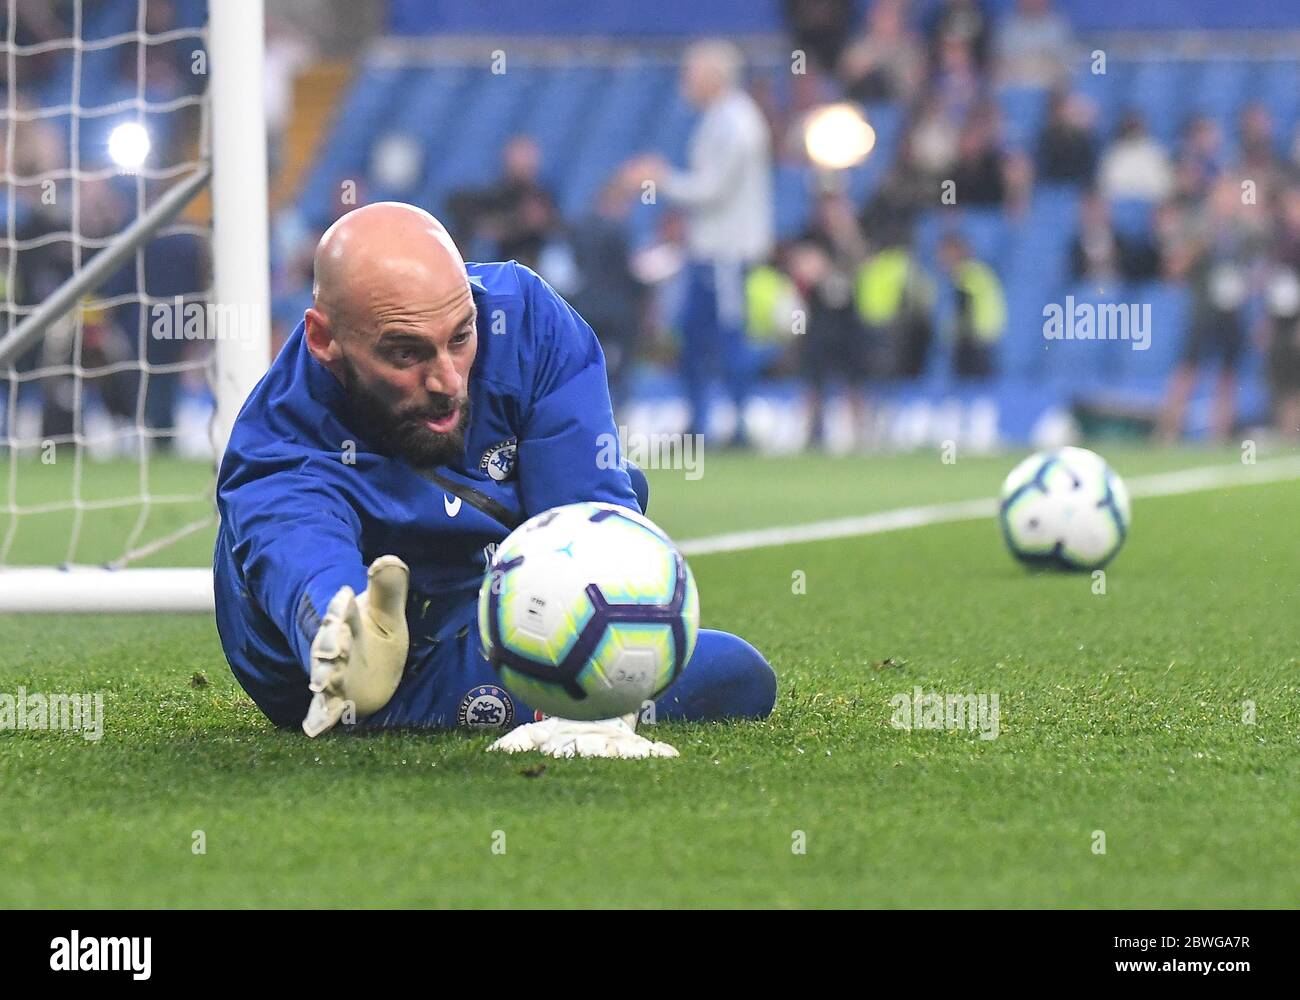 LONDON, ENGLAND - APRIL 22, 2019: Willy Caballero of Chelsea pictured ahead of the 2018/19 Premier League game between Chelsea FC and Burnley FC at Stamford Bridge. Stock Photo